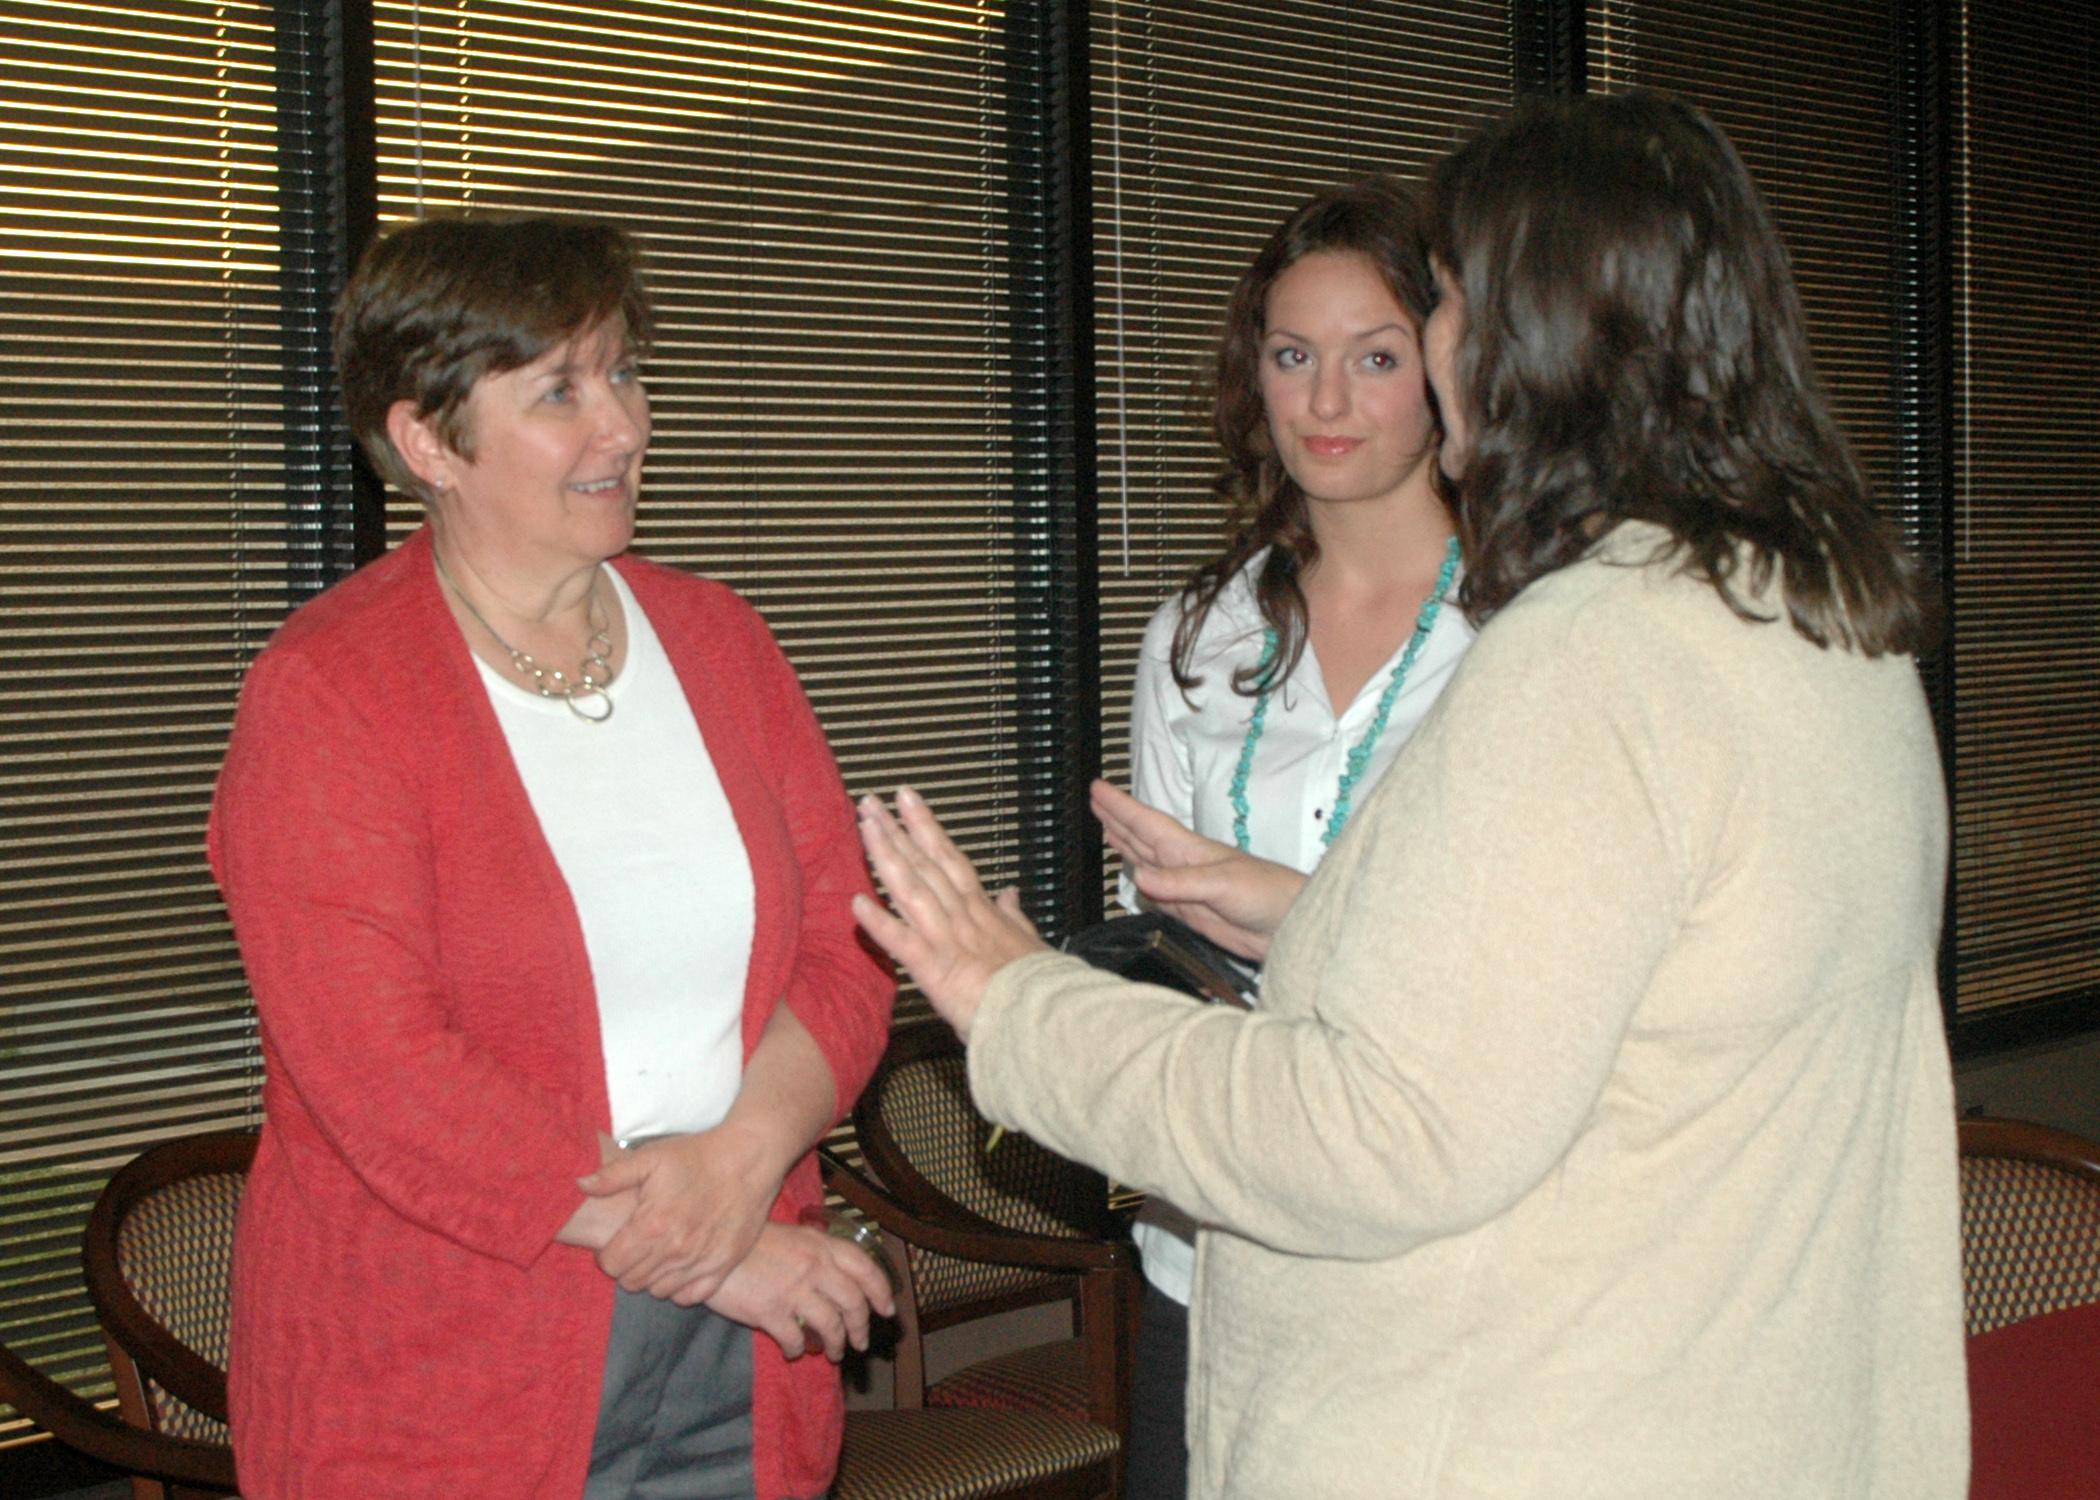 Ruth Hambleton (left), who founded Annie's Project in 2003, talks with graduates of the program May 7 at the program's 10th anniversary celebration. Annie's Project teaches females in agriculture-related fields problem-solving, record keeping and decision-making skills. (Photo by MSU Ag Communications/Susan Collins-Smith)